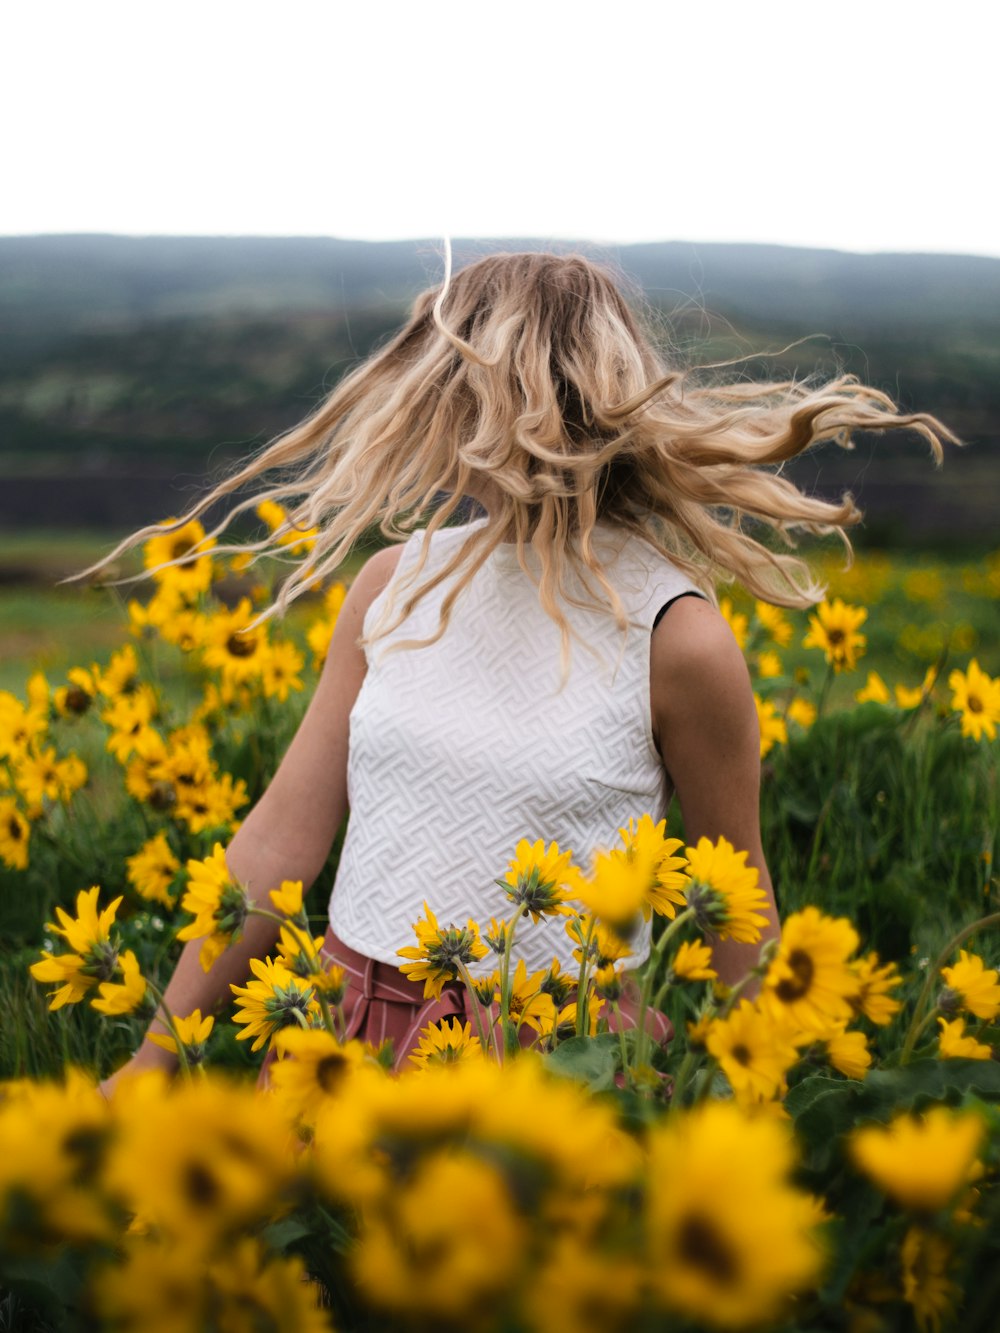 woman in white tank top standing on yellow flower field during daytime